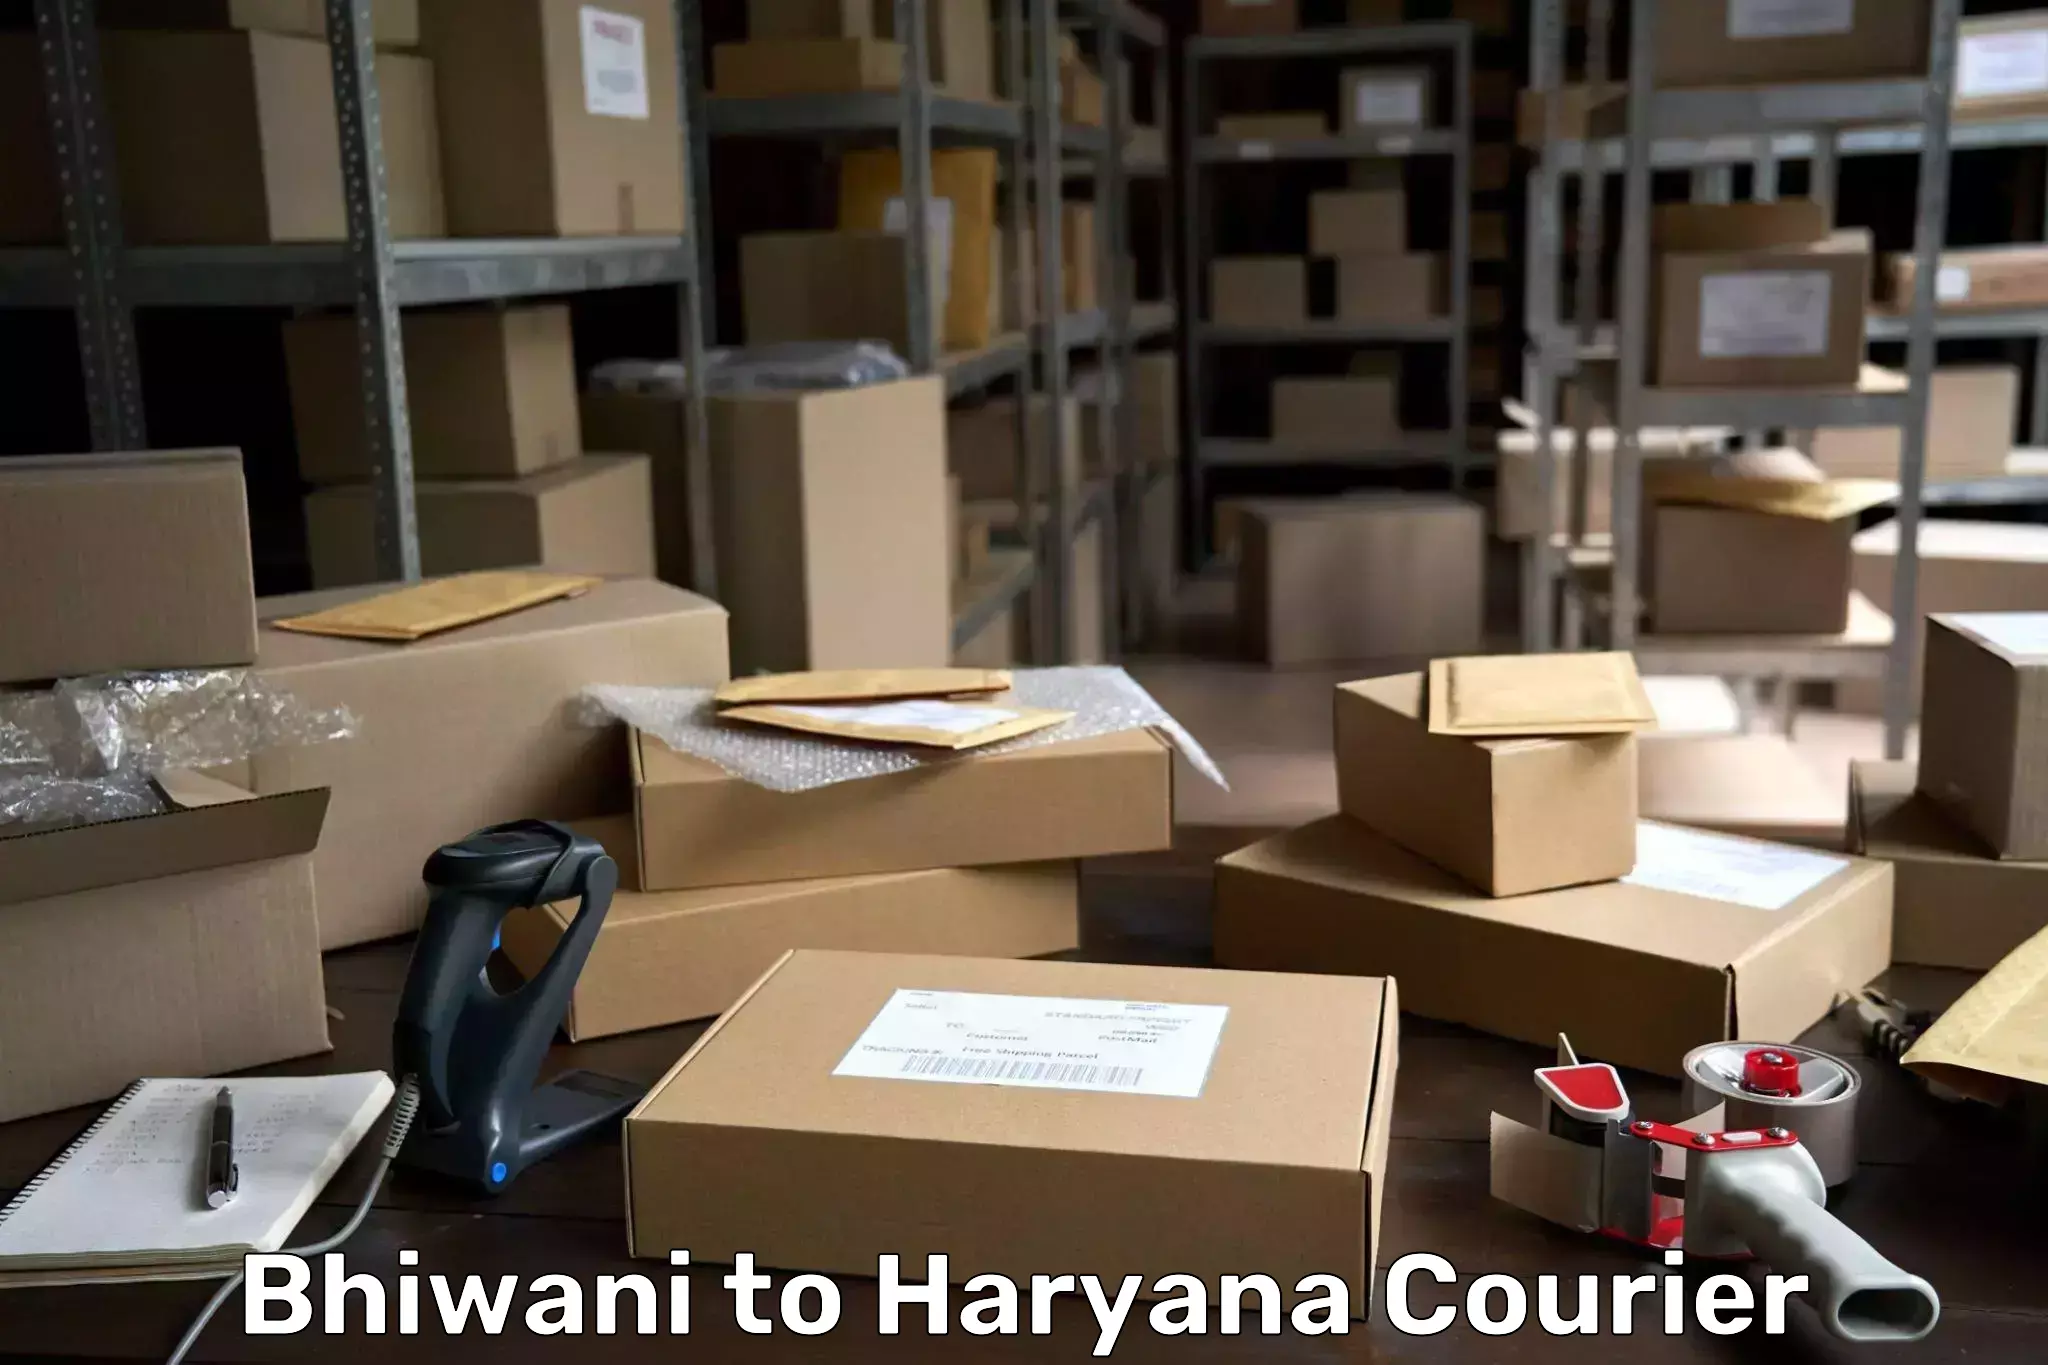 Tailored shipping services Bhiwani to Gurgaon